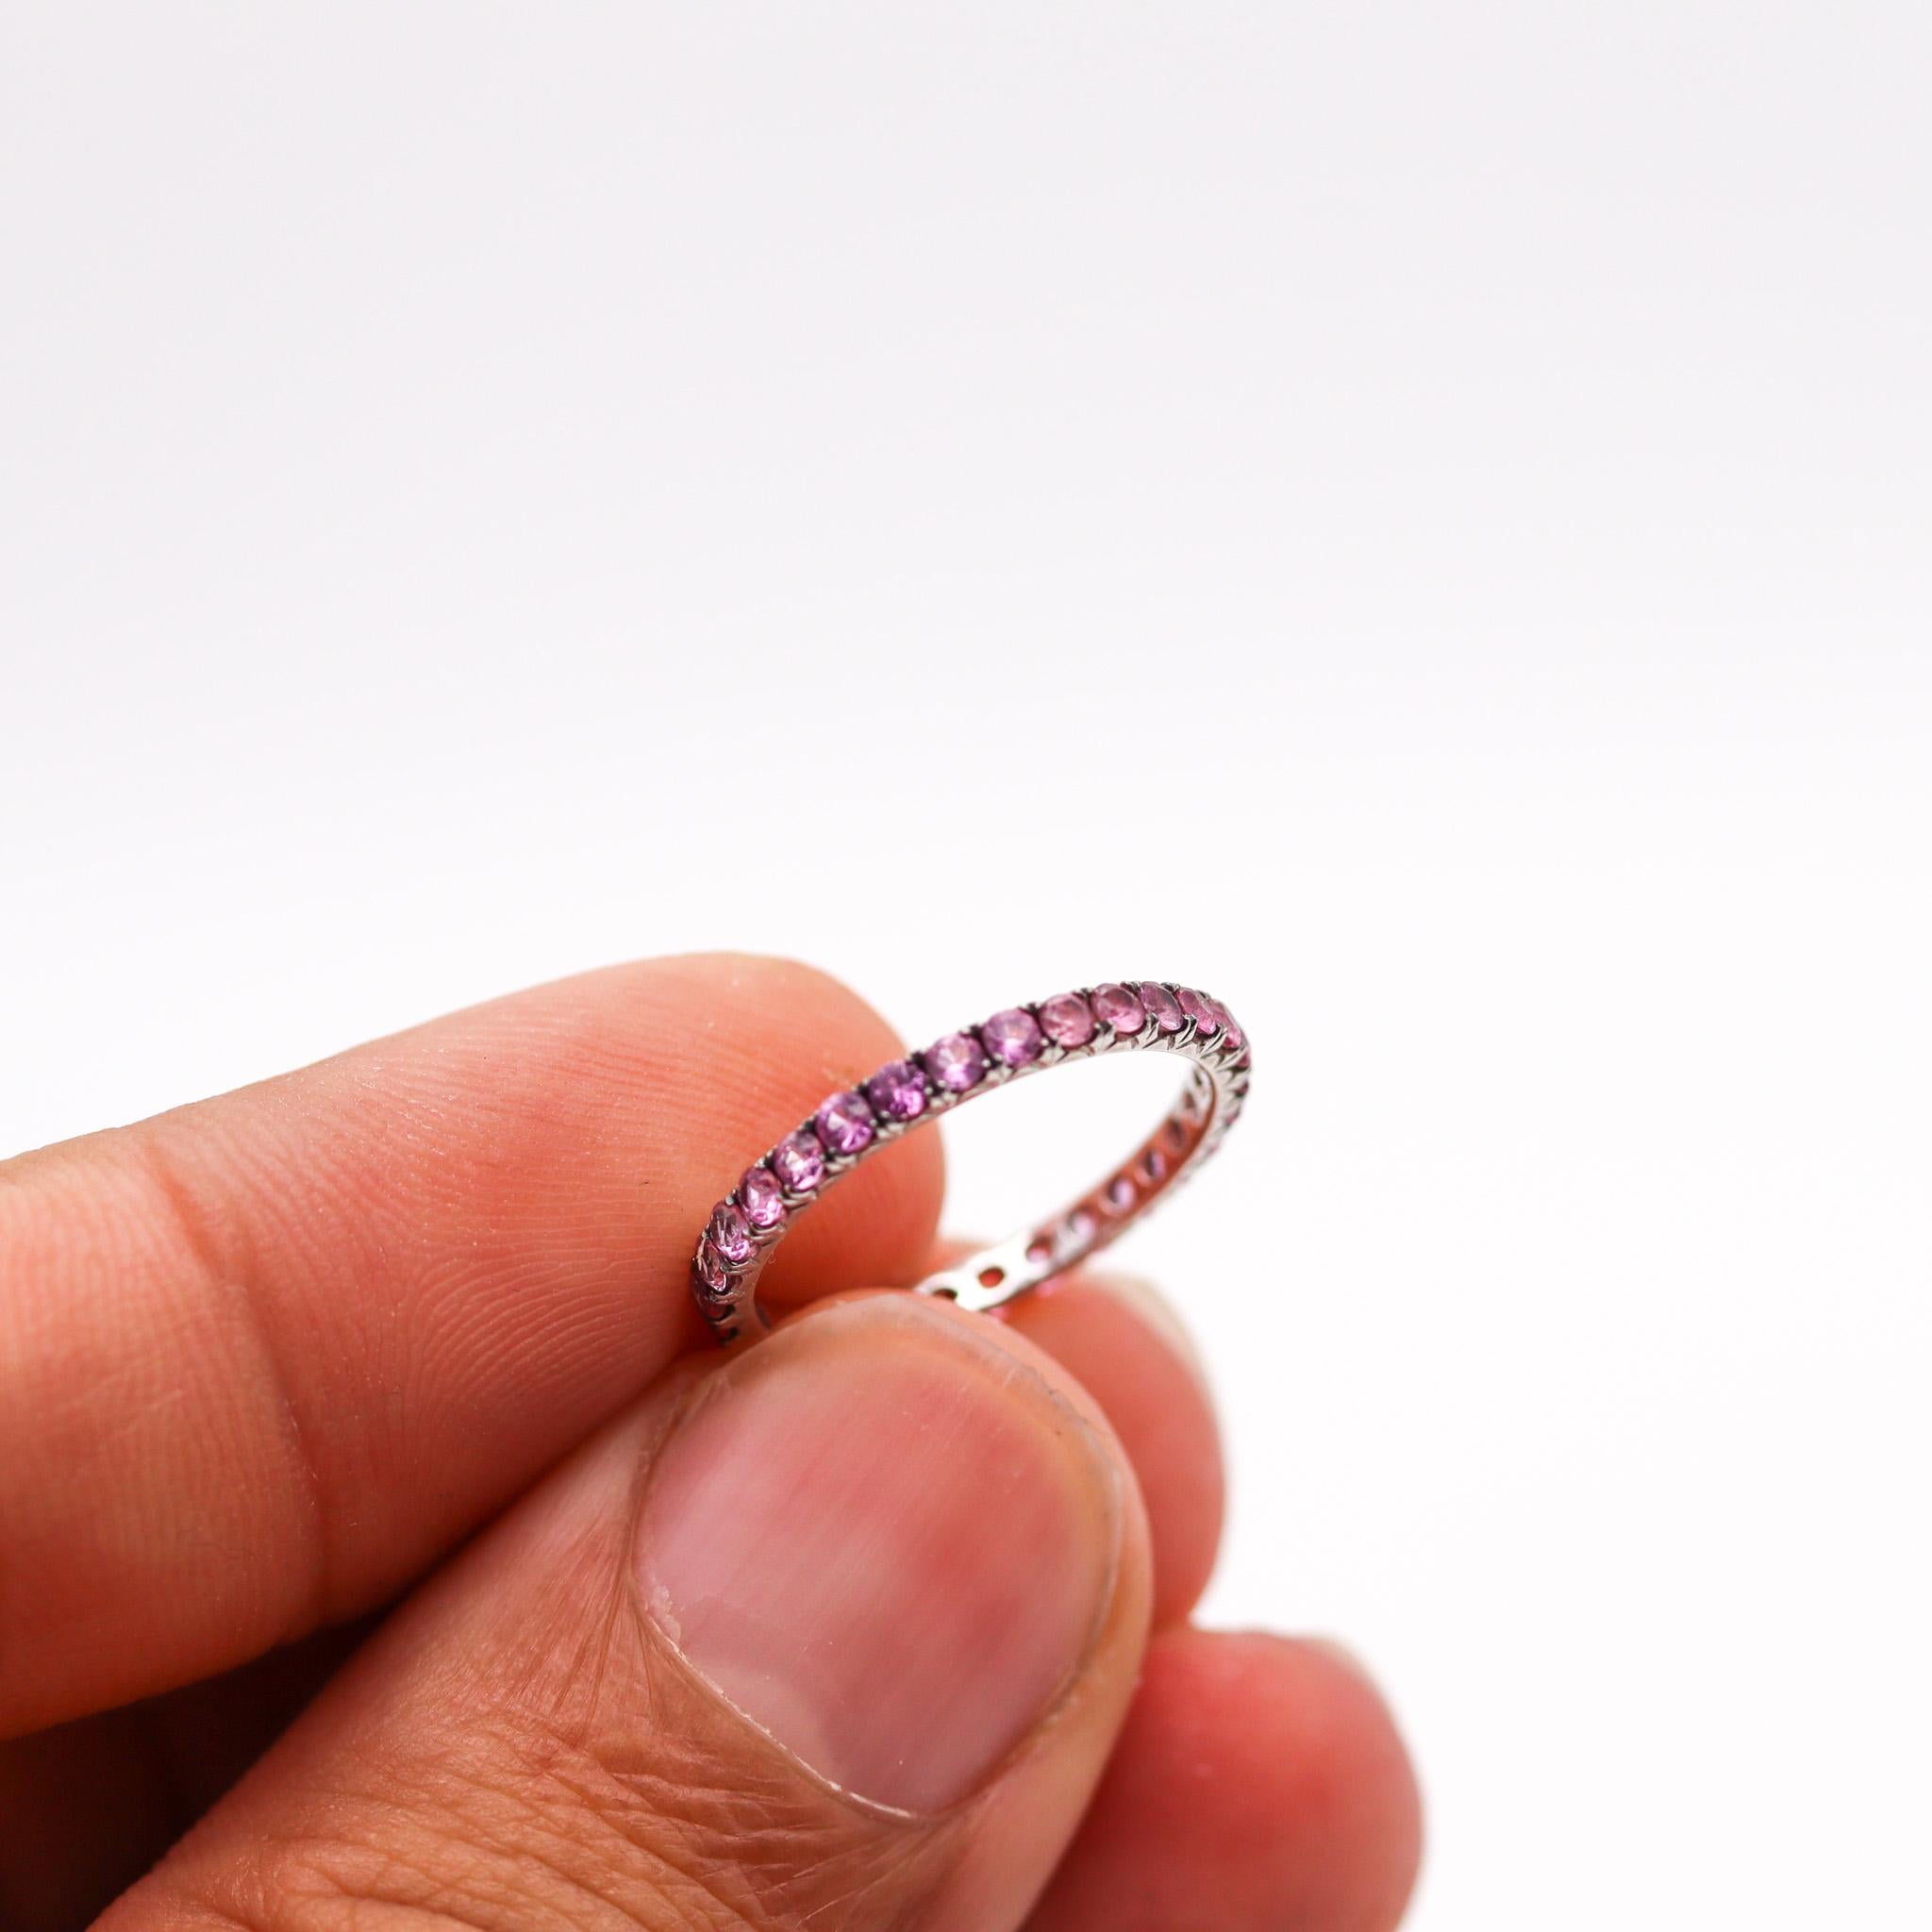 Italian Eternity Ring Band In 18 Kt White Gold With 1.20 Ctw In Pink Sapphires In Excellent Condition For Sale In Miami, FL